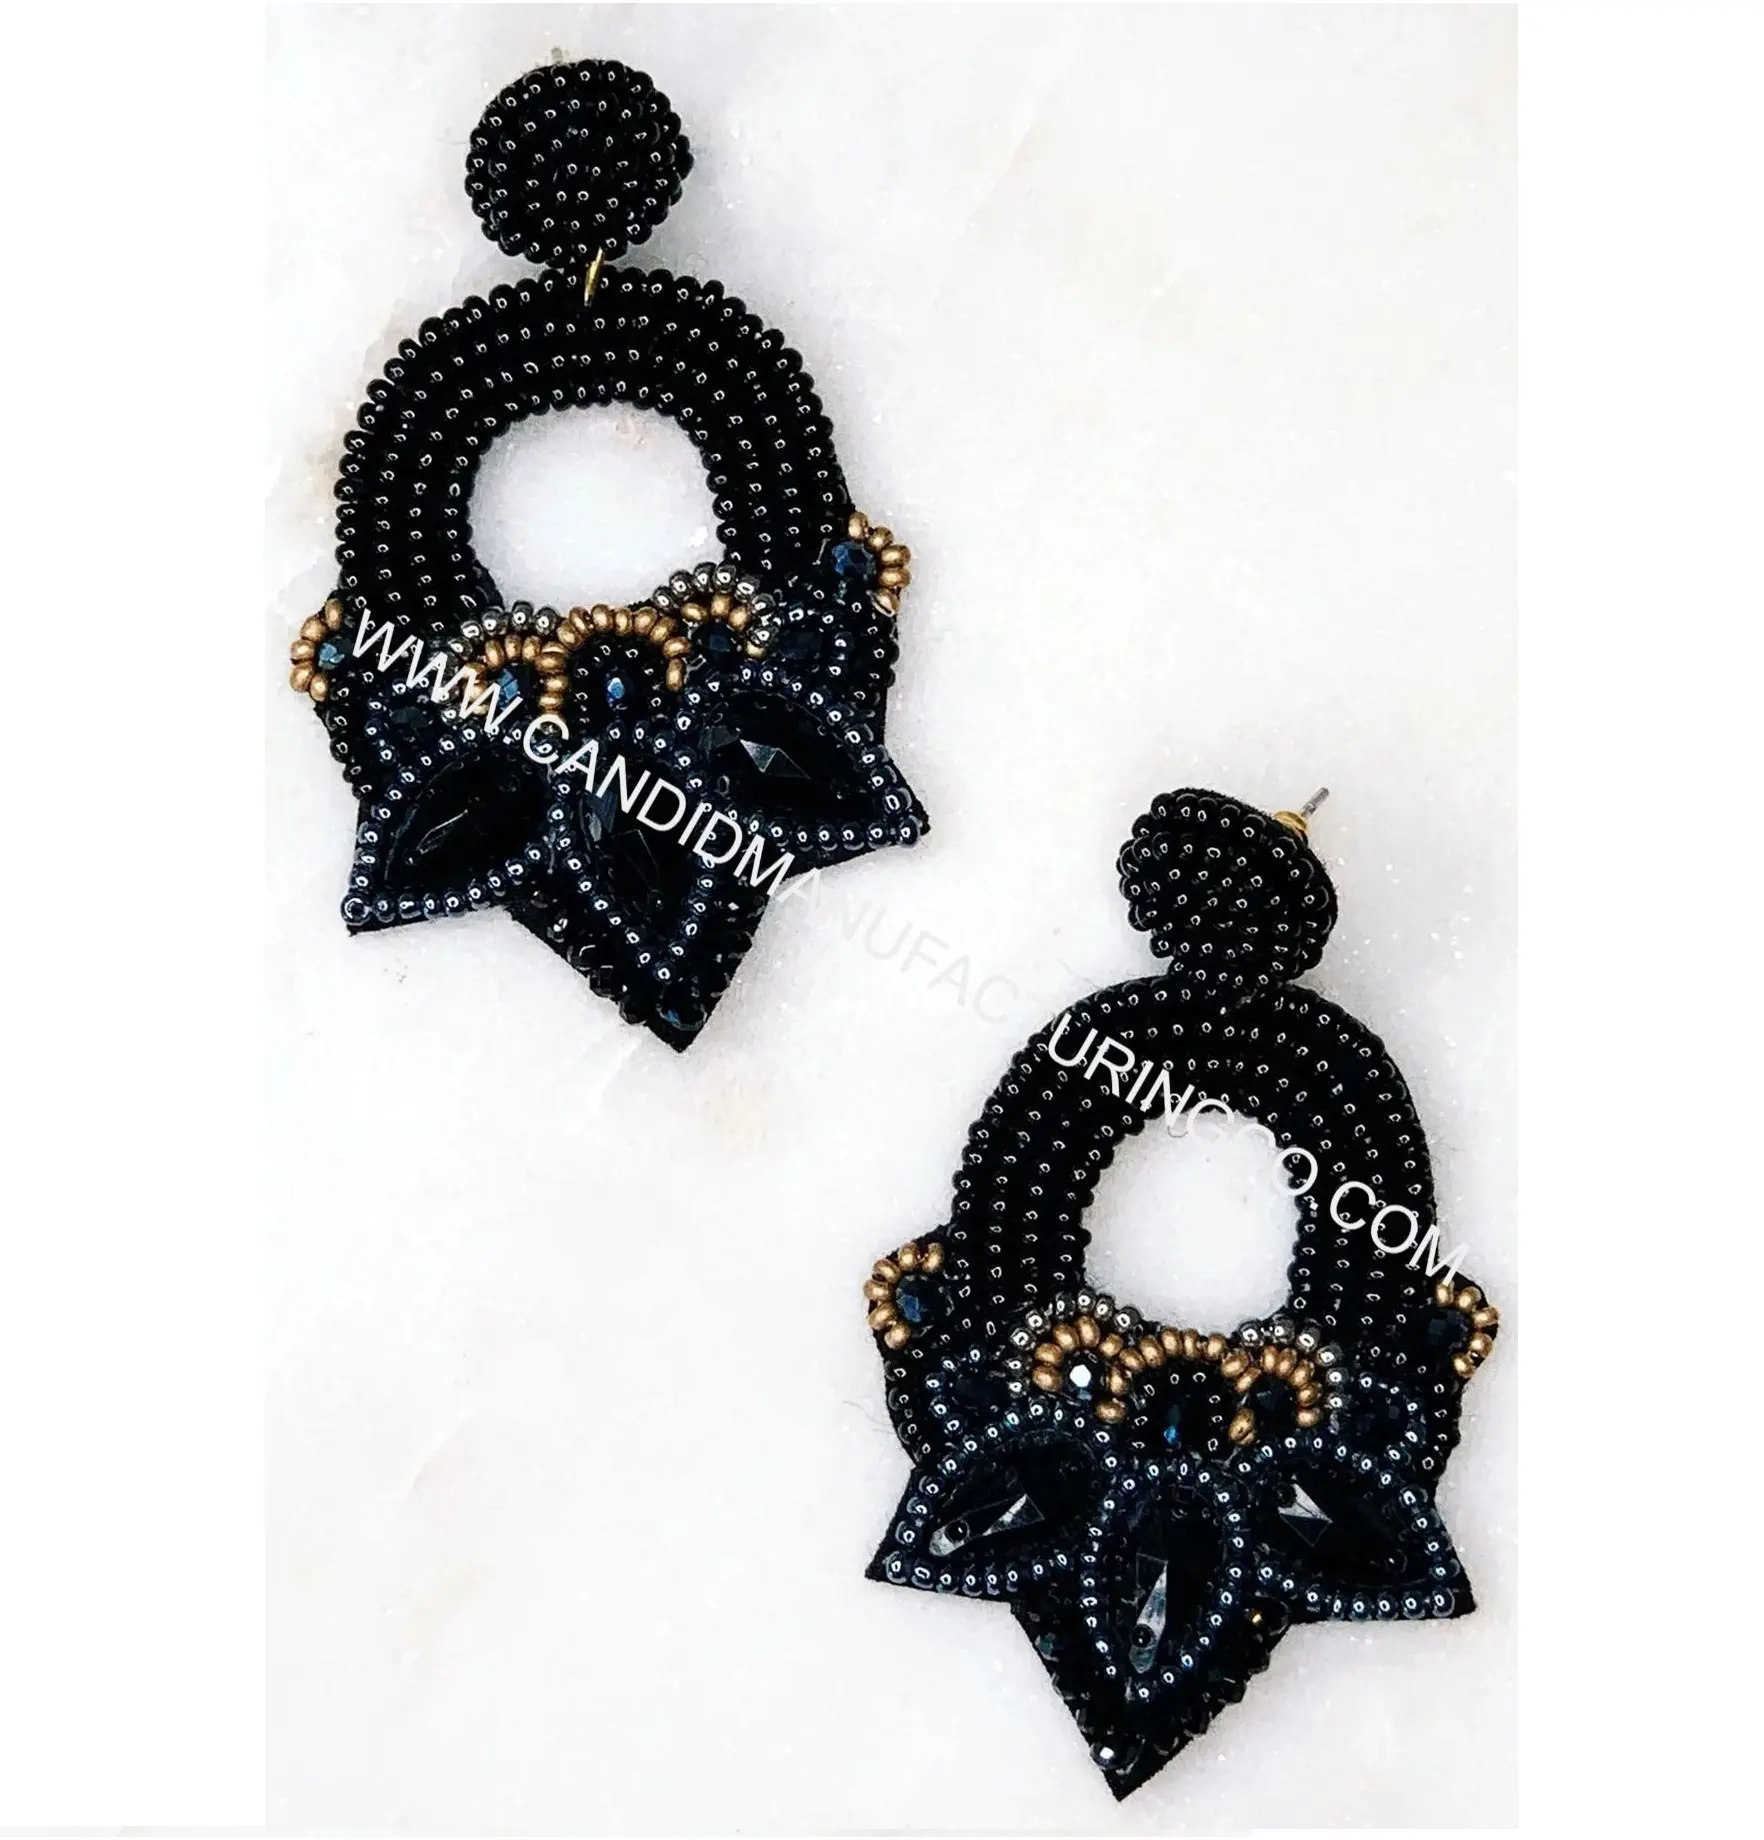 CALLA BEADED EARRINGS IN BLACK IN MULTI COLOUR LIGHT WEIGHT EARRINGS FASHION JEWELRY AND ACCESSORIES CHEAP PRICE